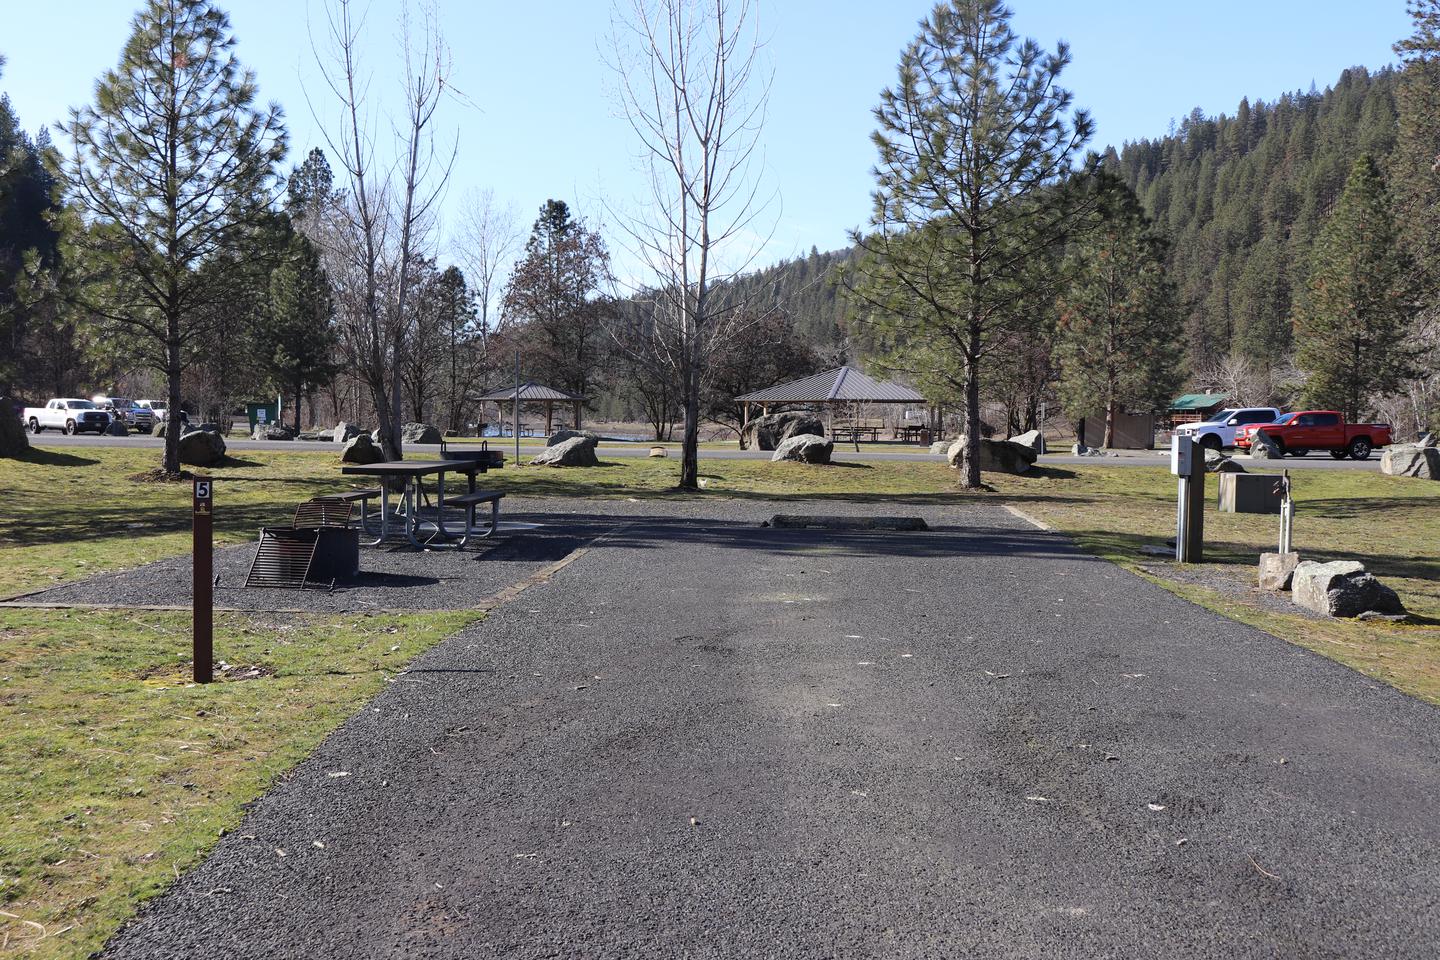 One of the longest RV sites offered at Pink House Recreation Site. Site 5 is one of the longest RV sites offered at Pink House Recreation Site.